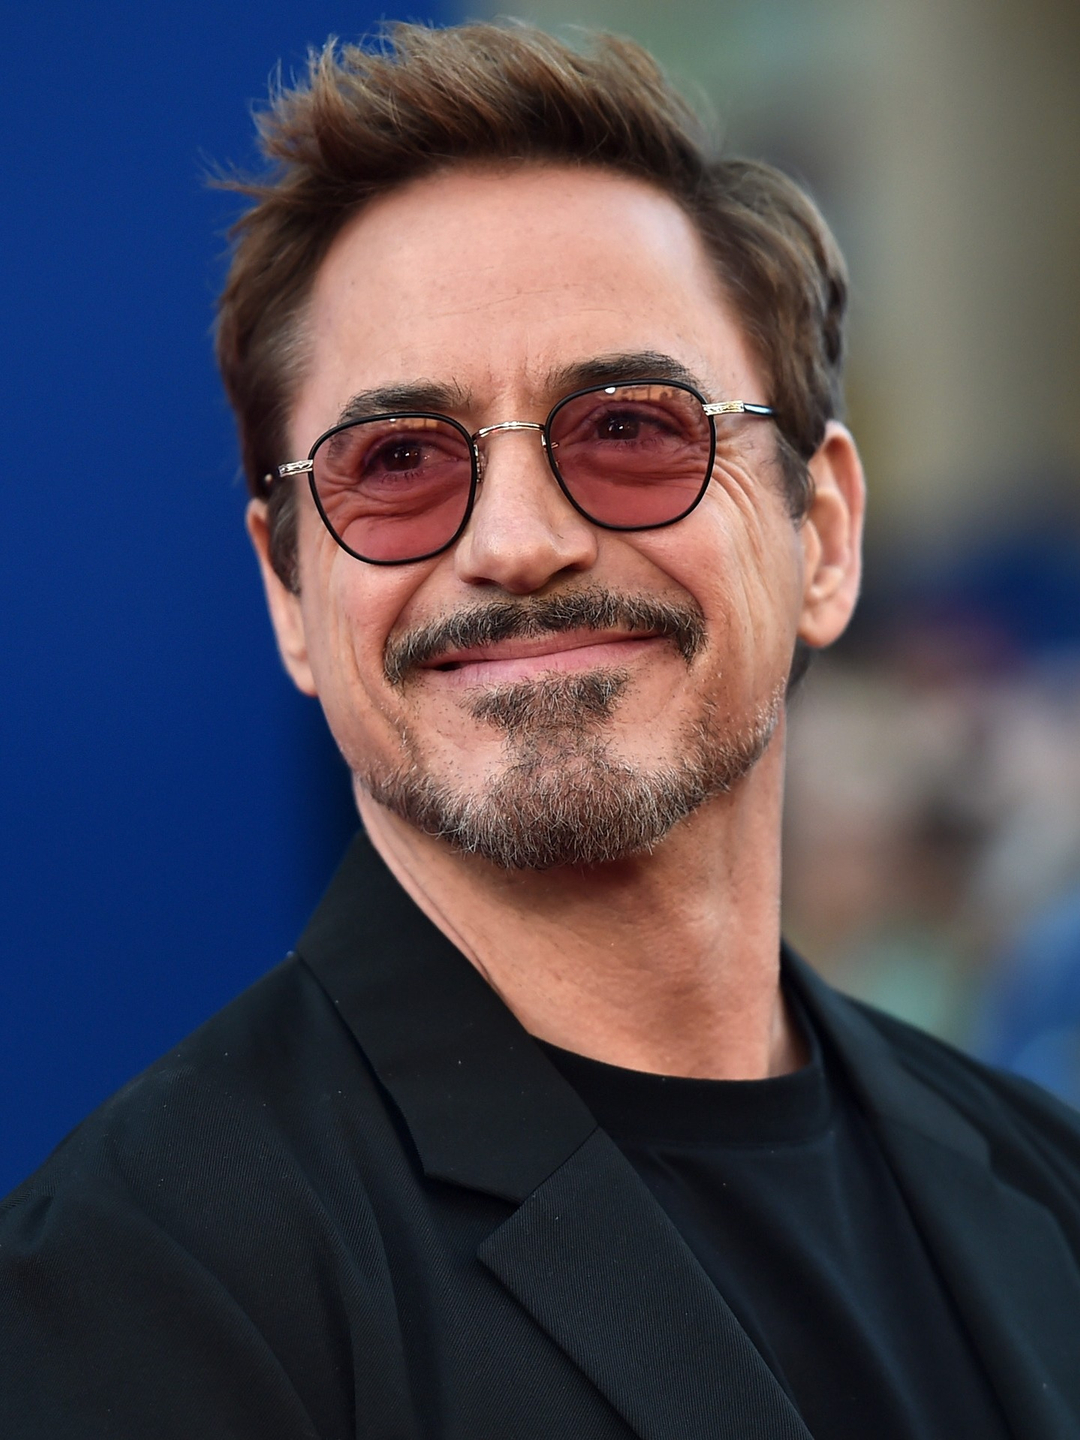 Robert Downey Jr. who is his mother